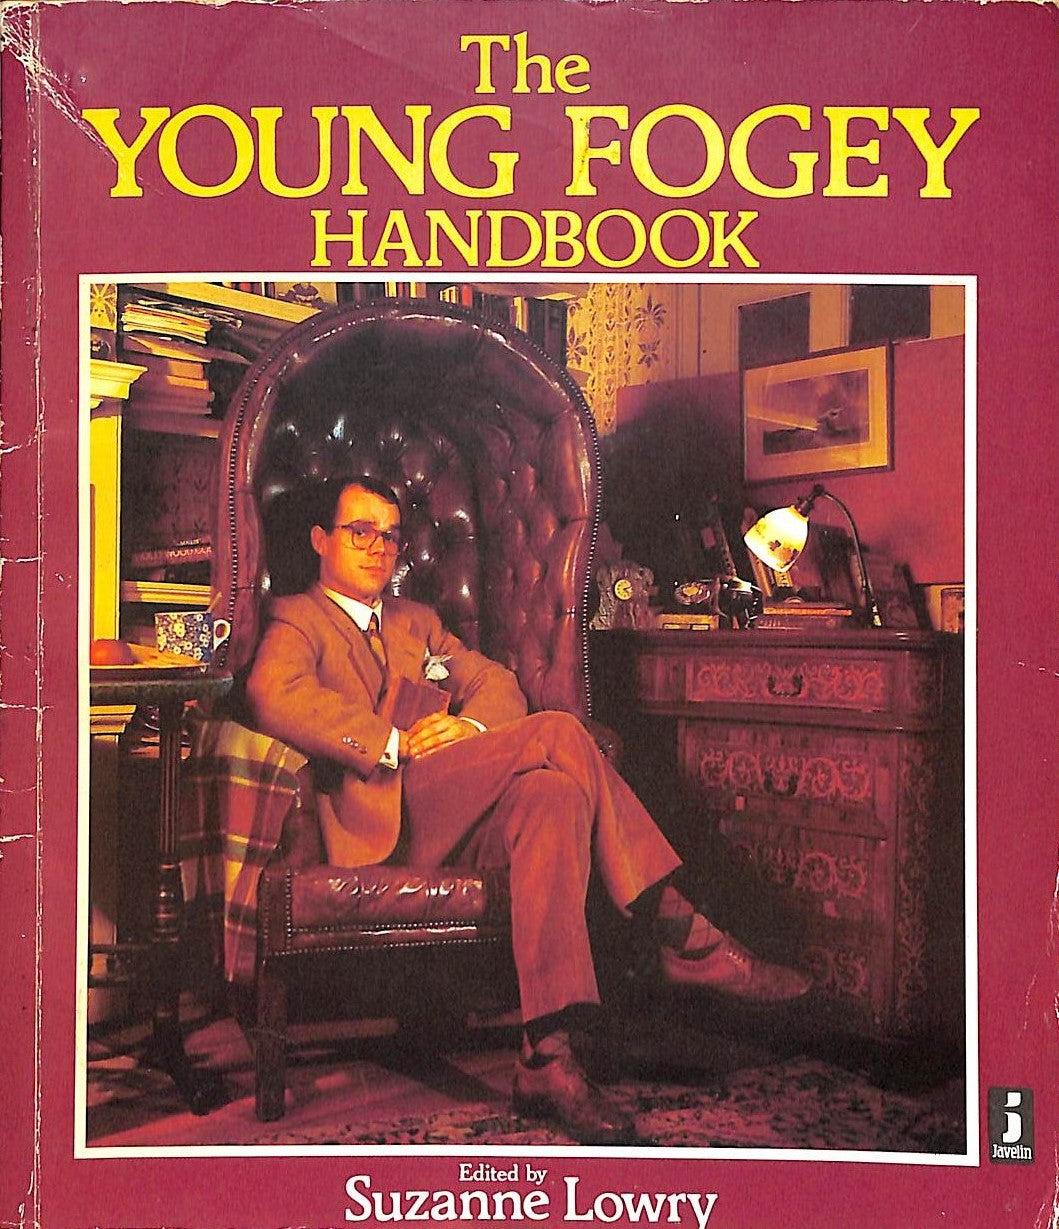 "The Young Fogey Handbook: A Guide To Backward Mobility" 1985 LOWRY, Suzanne